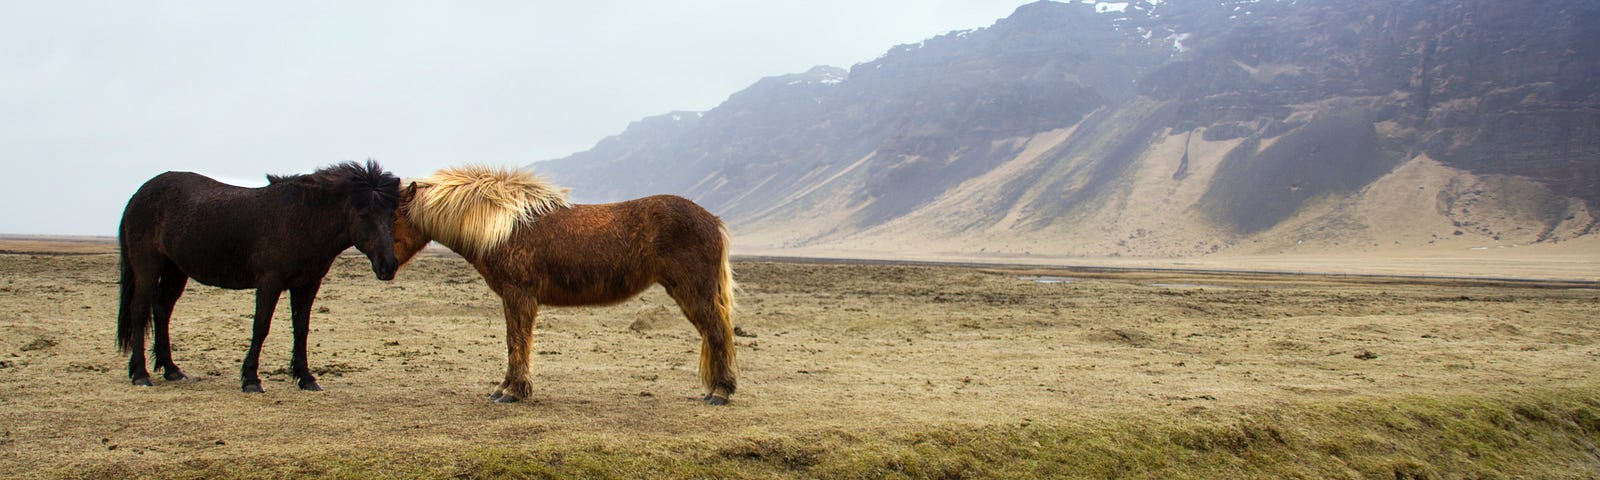 Two wild horses nuzzle in a rugged landscape